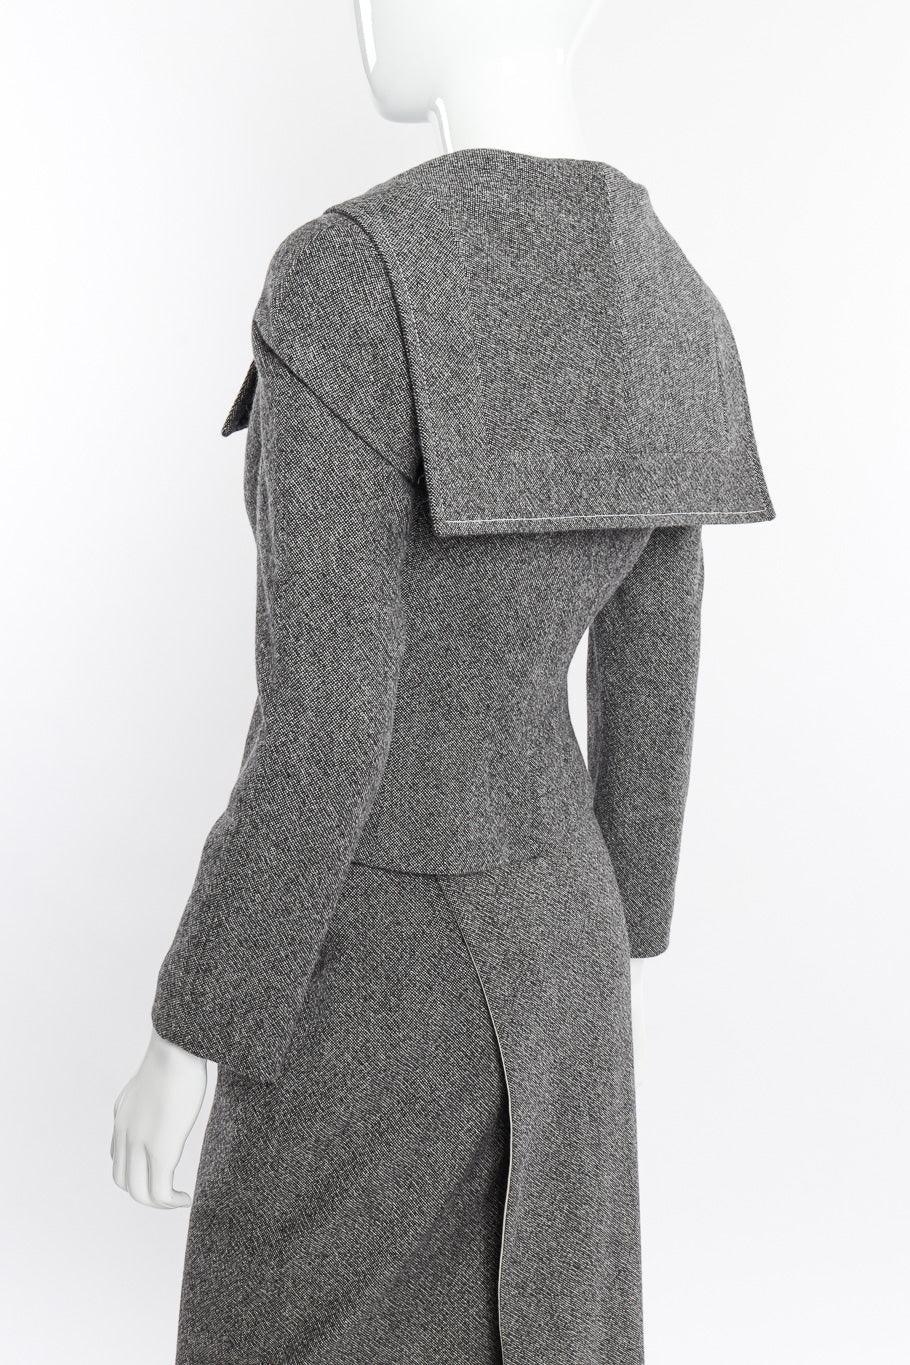 Wool Jacket & Wrap Skirt Suit by Christian Dior on mannequin back close up @recessla